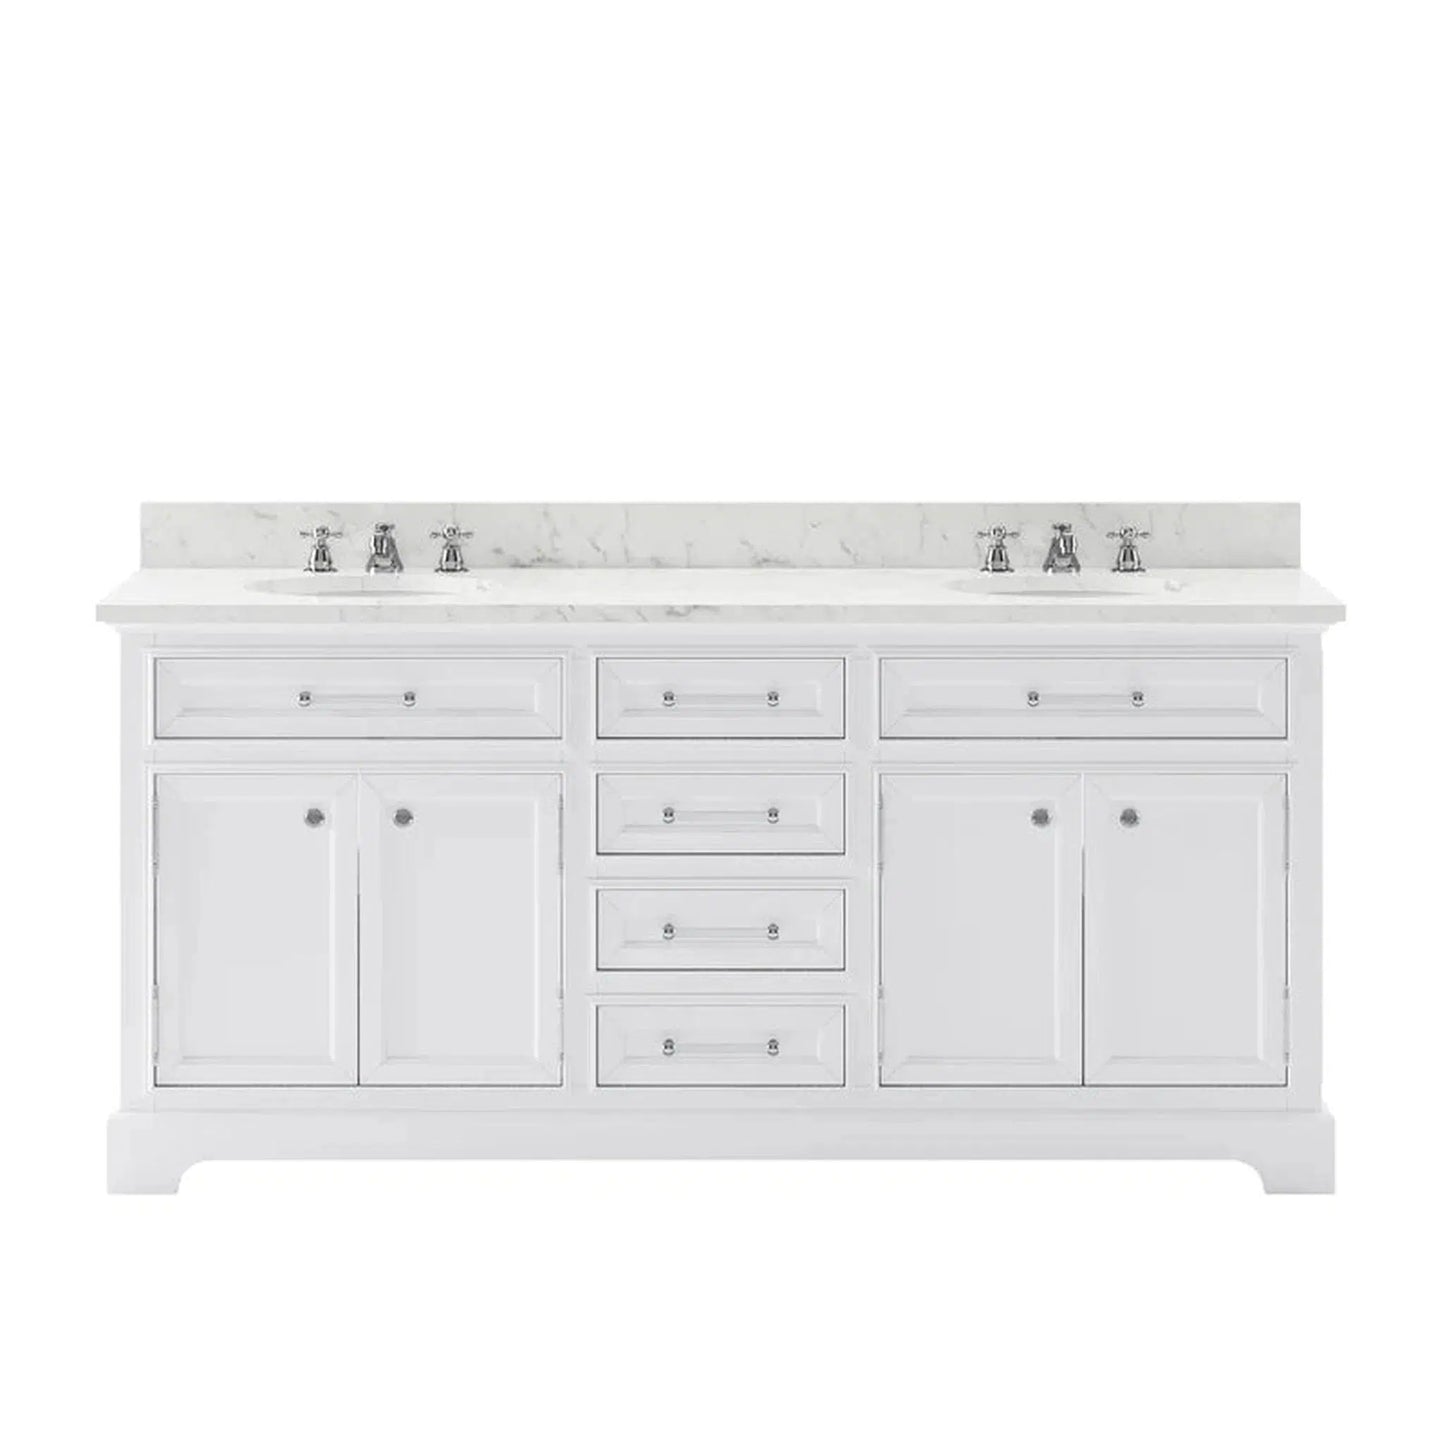 Water Creation 72 Inch Cashmere Grey Double Sink Bathroom Vanity With Matching Framed Mirrors From The Derby Collection